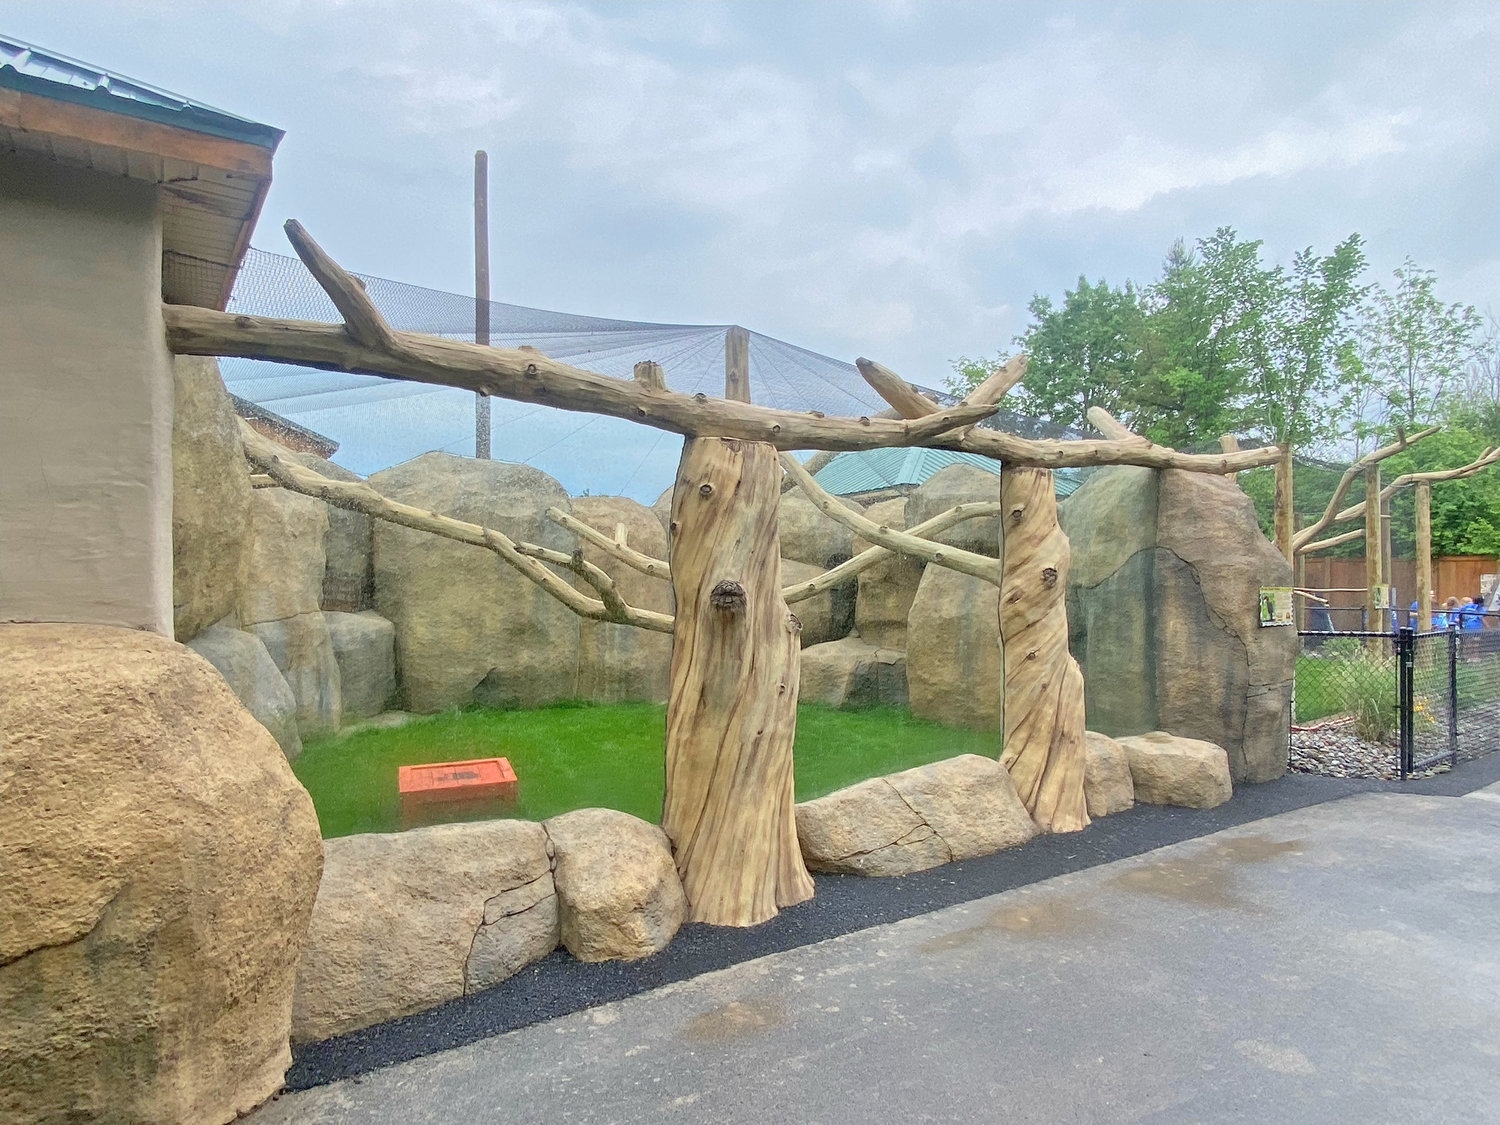 New exhibits highlight opening of The Wild Animal Park | Daily Sentinel